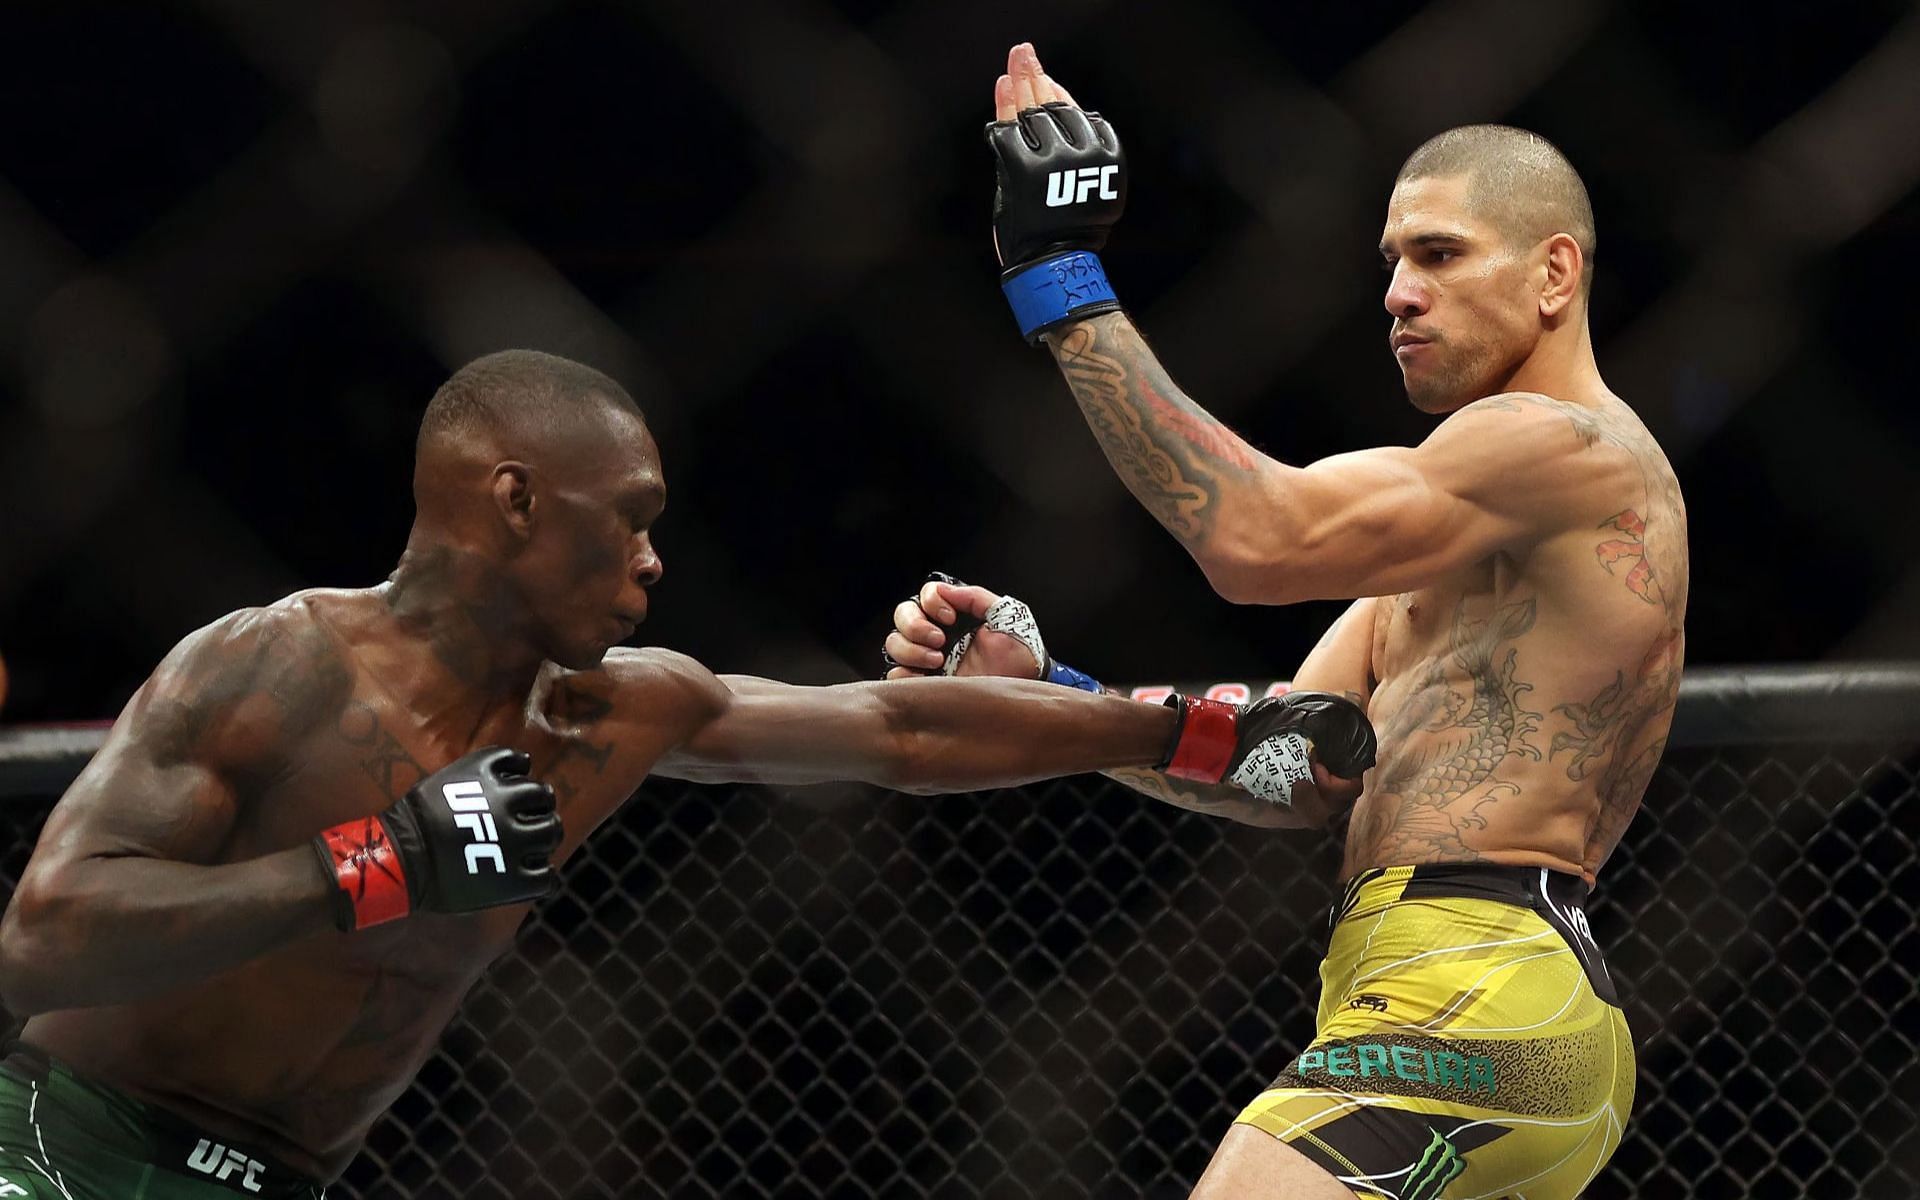 Can Israel Adesanya defeat Alex Pereira in their rematch at UFC 287?